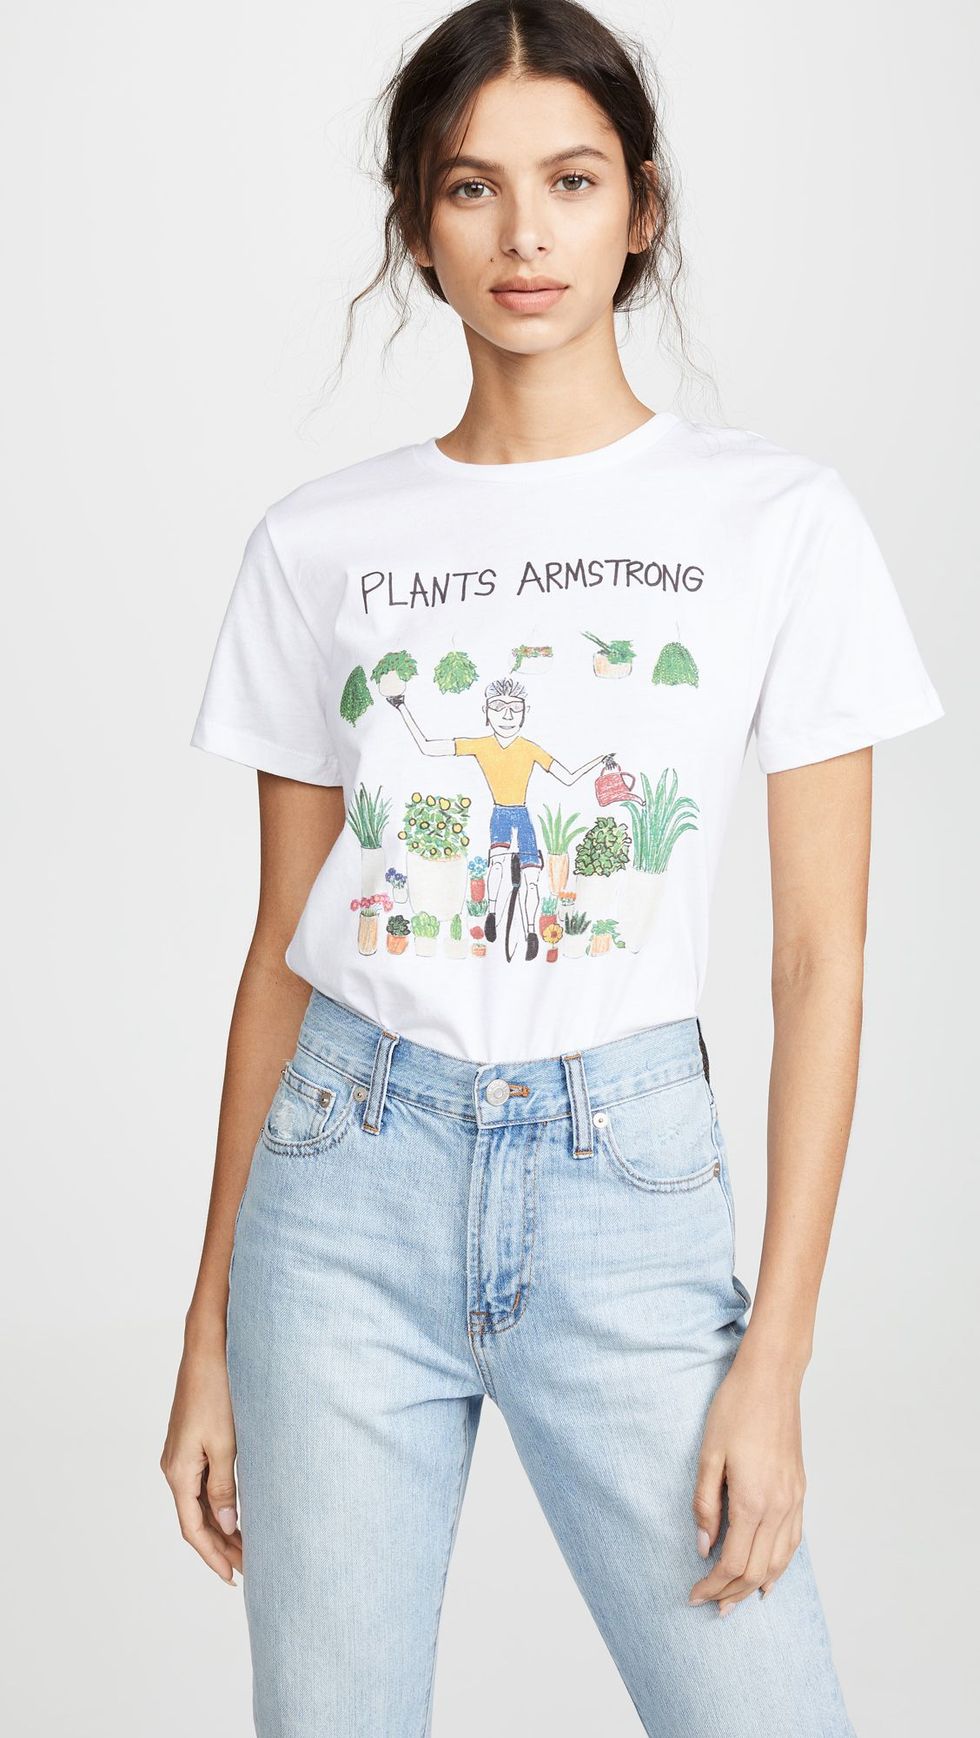 Plants Armstrong T-Shirt